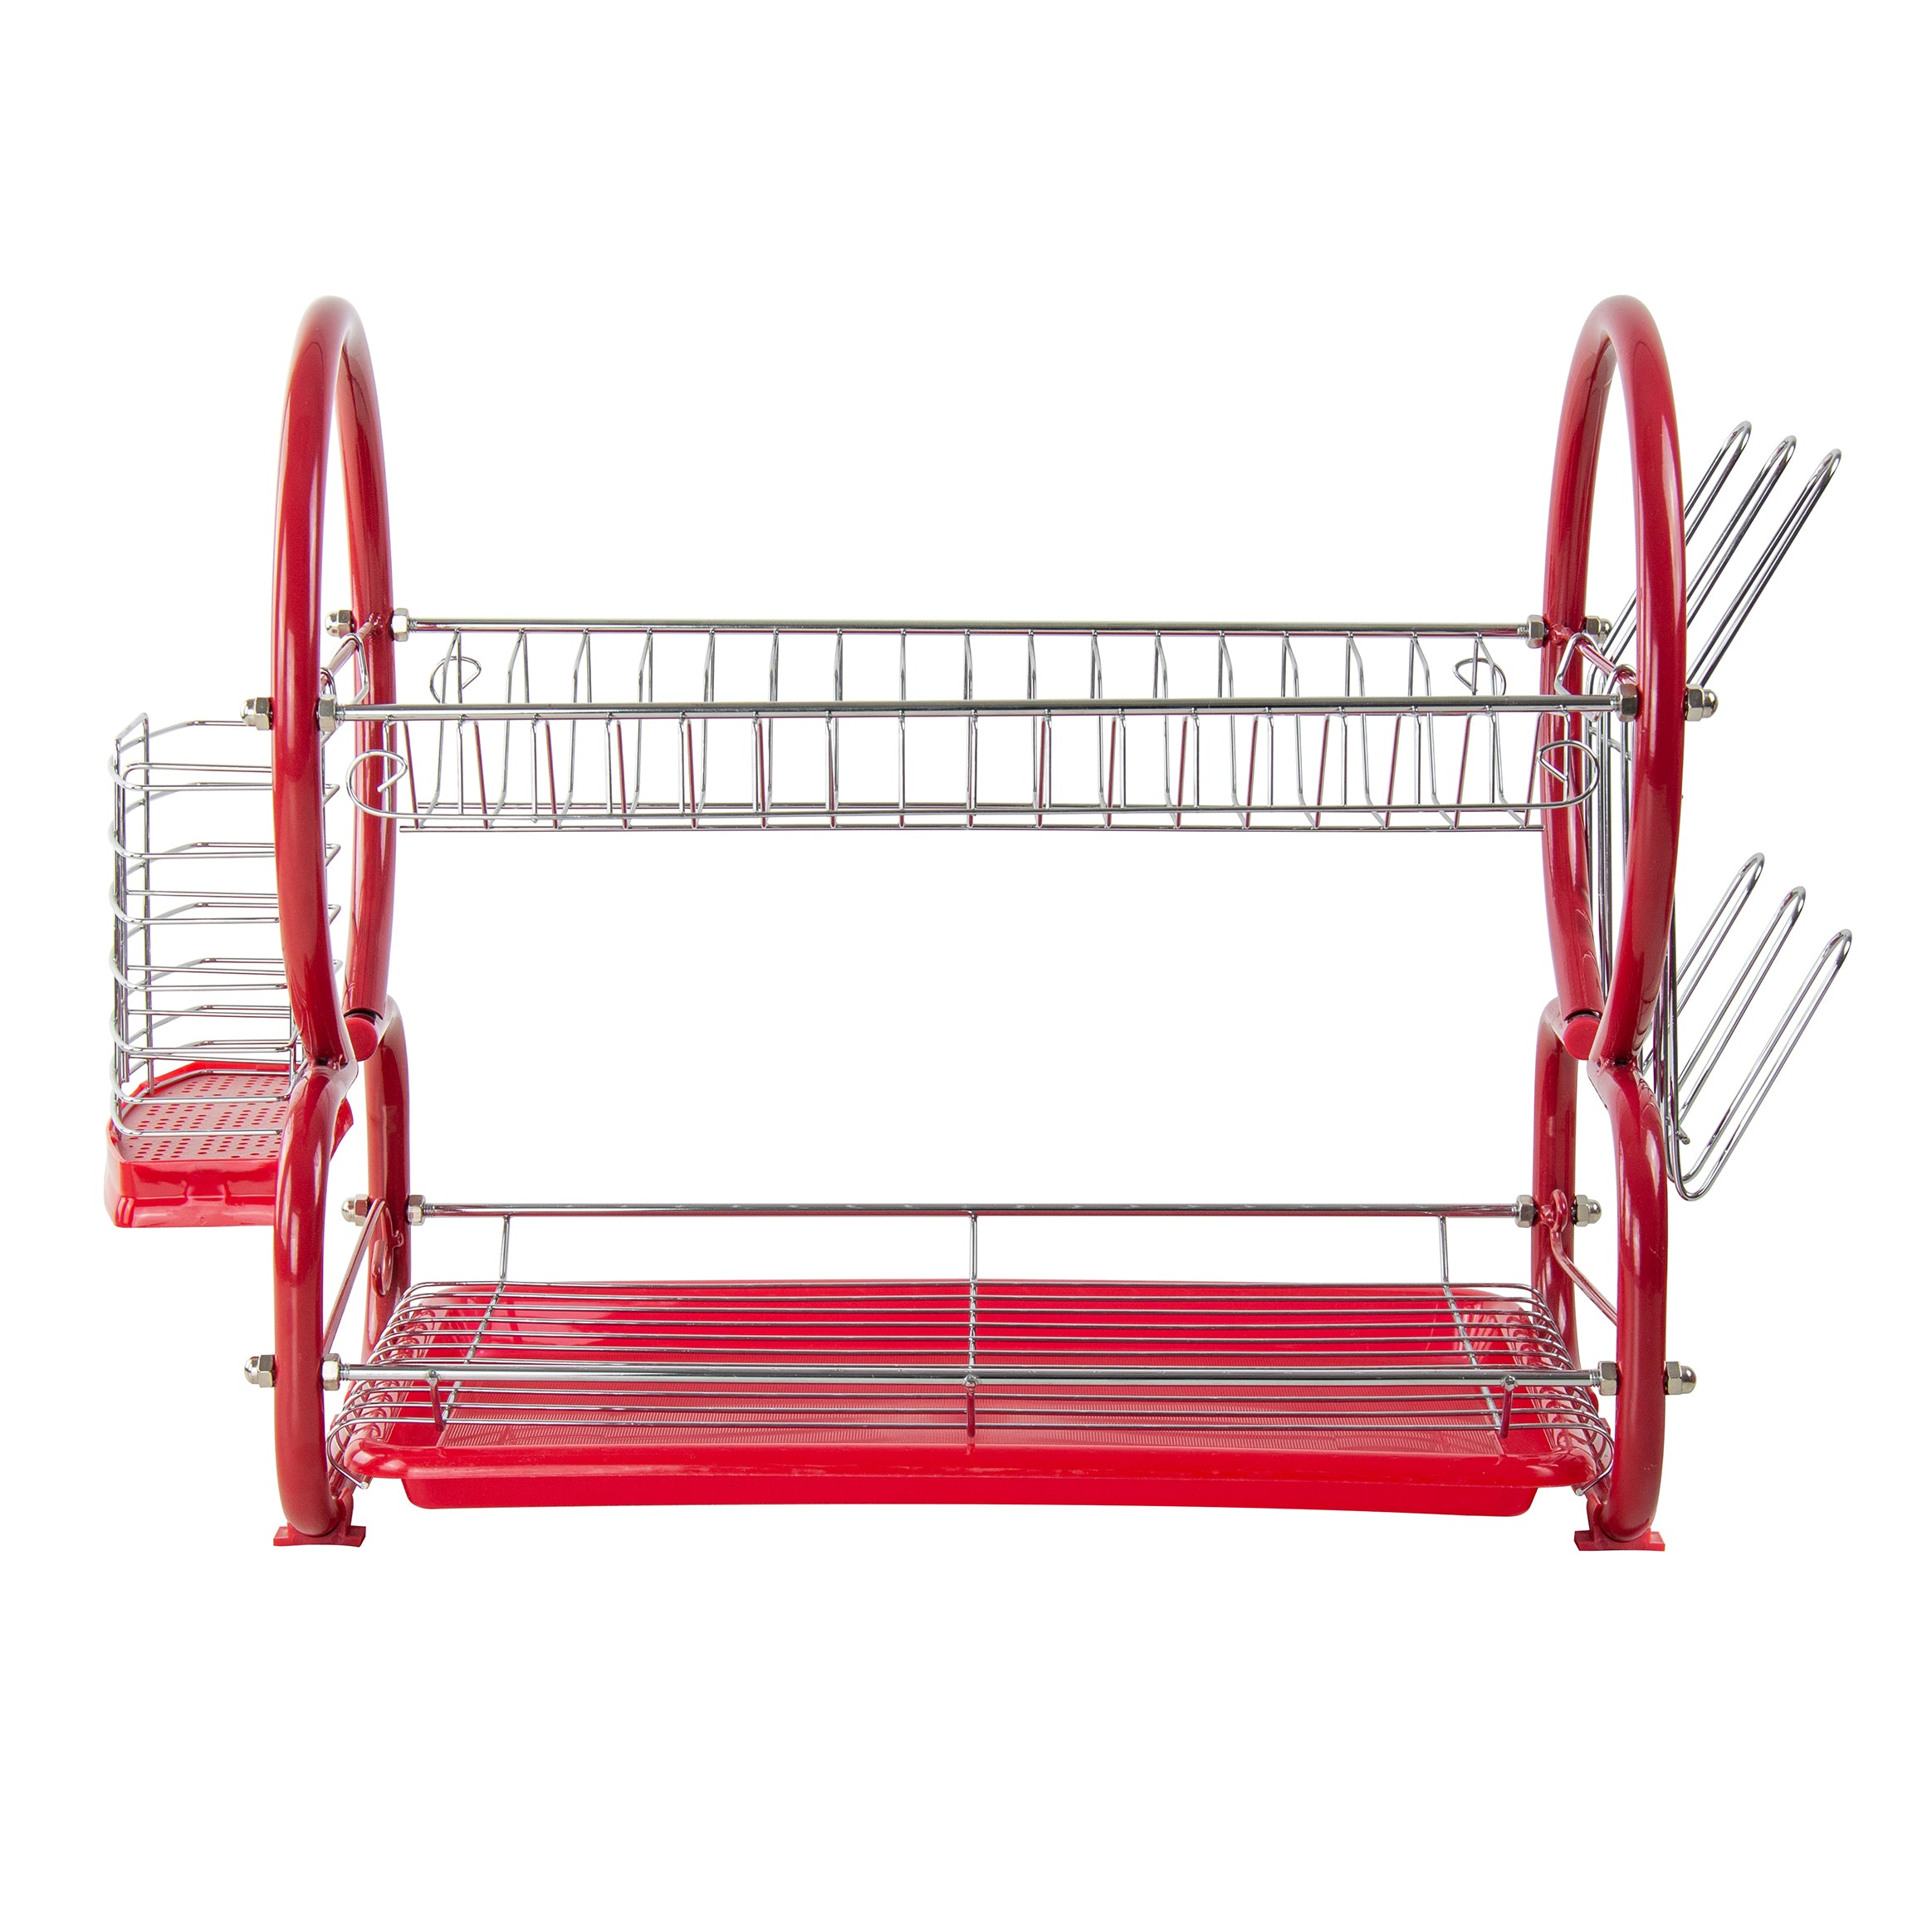 Dish Drainer - Red